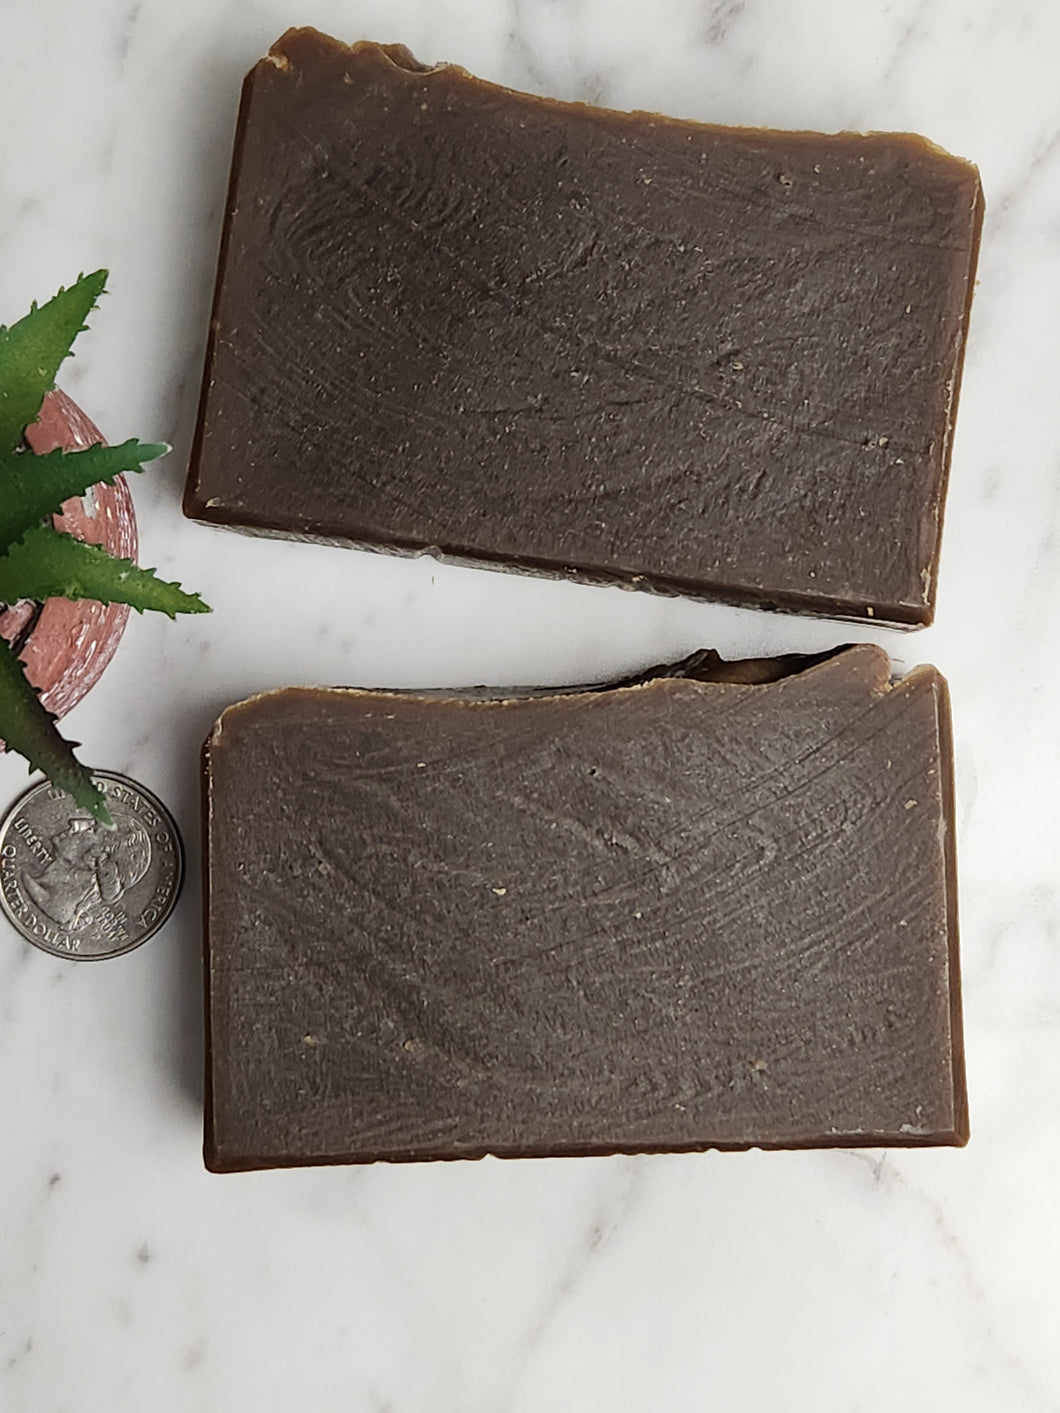 Pine Tar Soap Earthly Soapgoods 